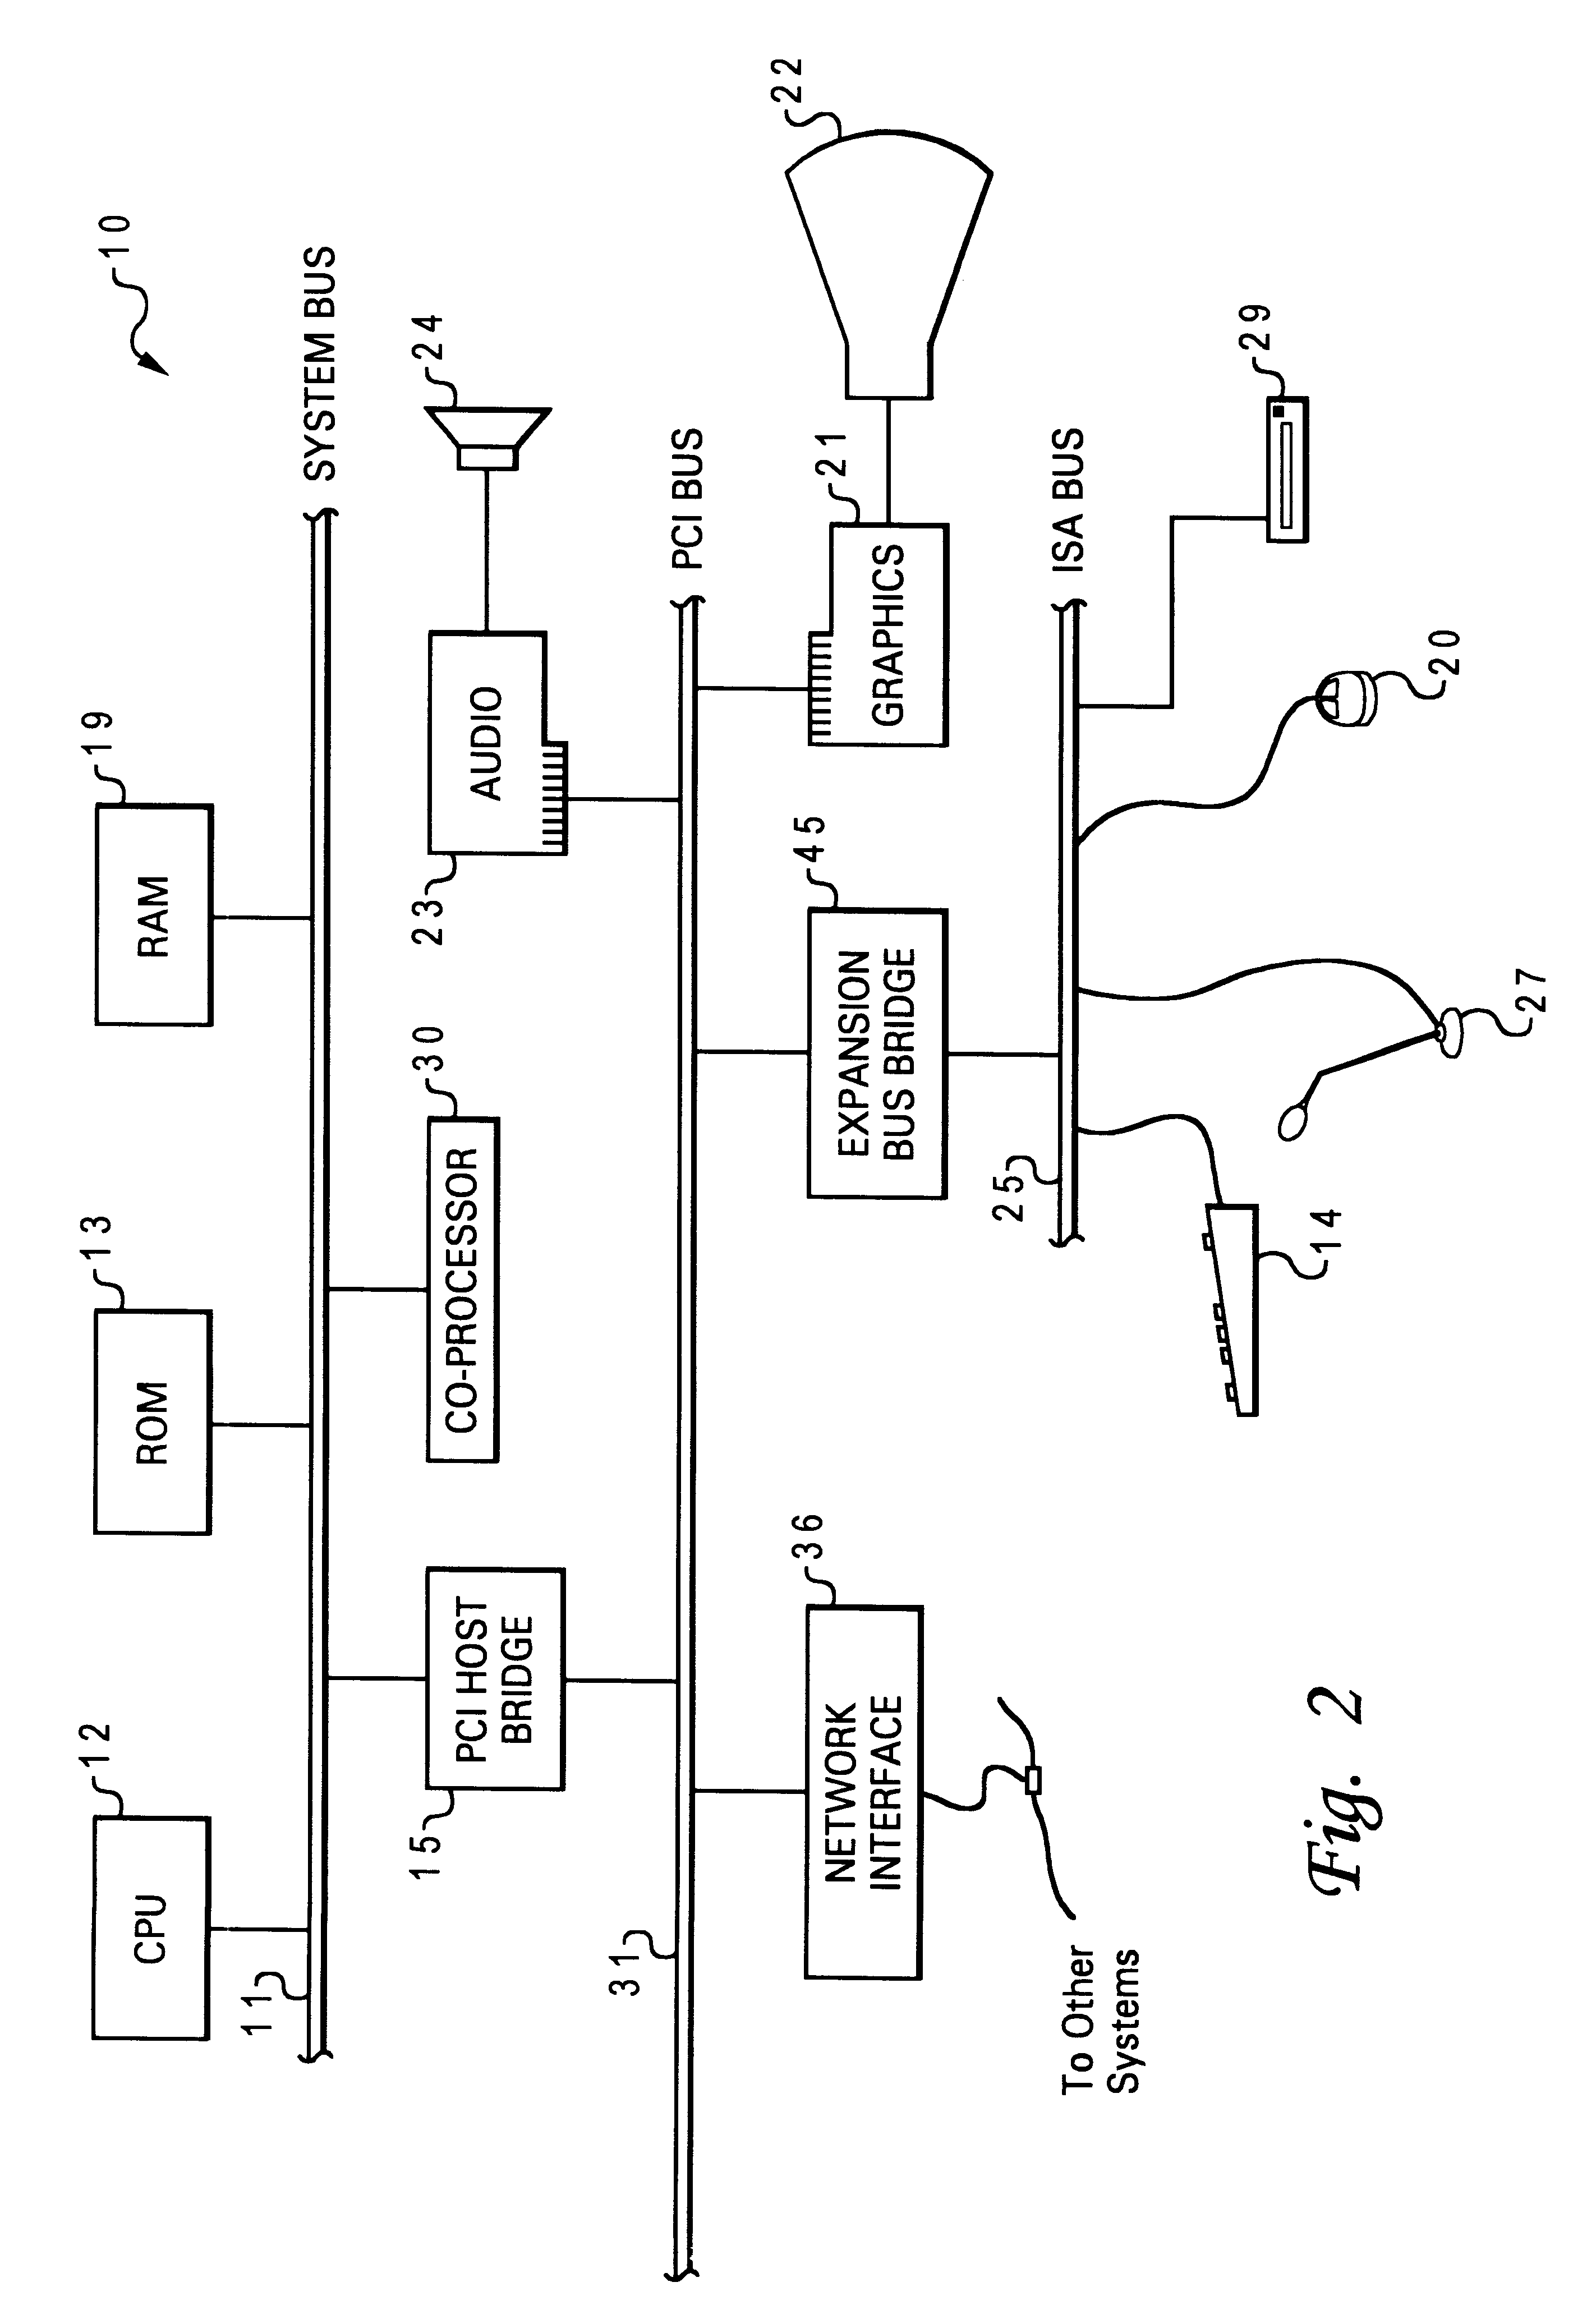 Recirculating network address list with single button sequencer/selector